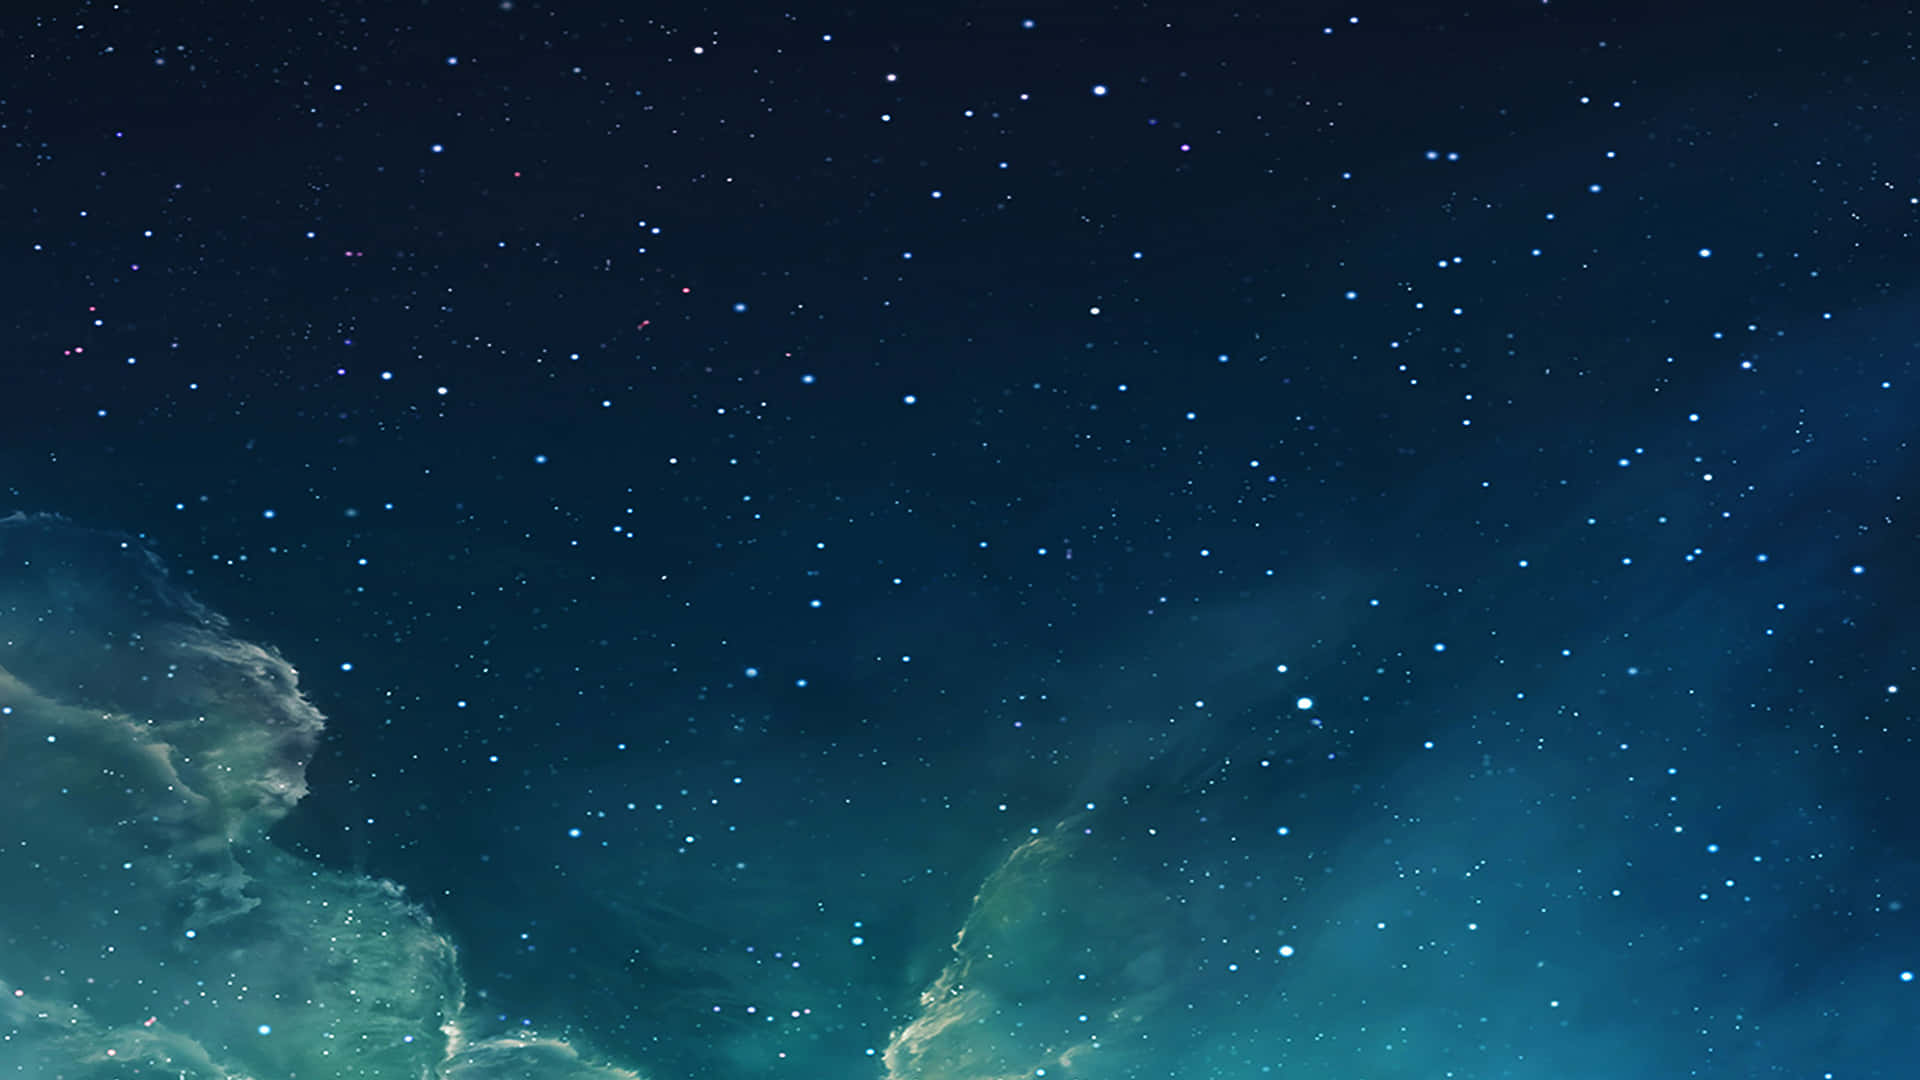 Witness the Beauty of the Starry Night Sky Wallpaper